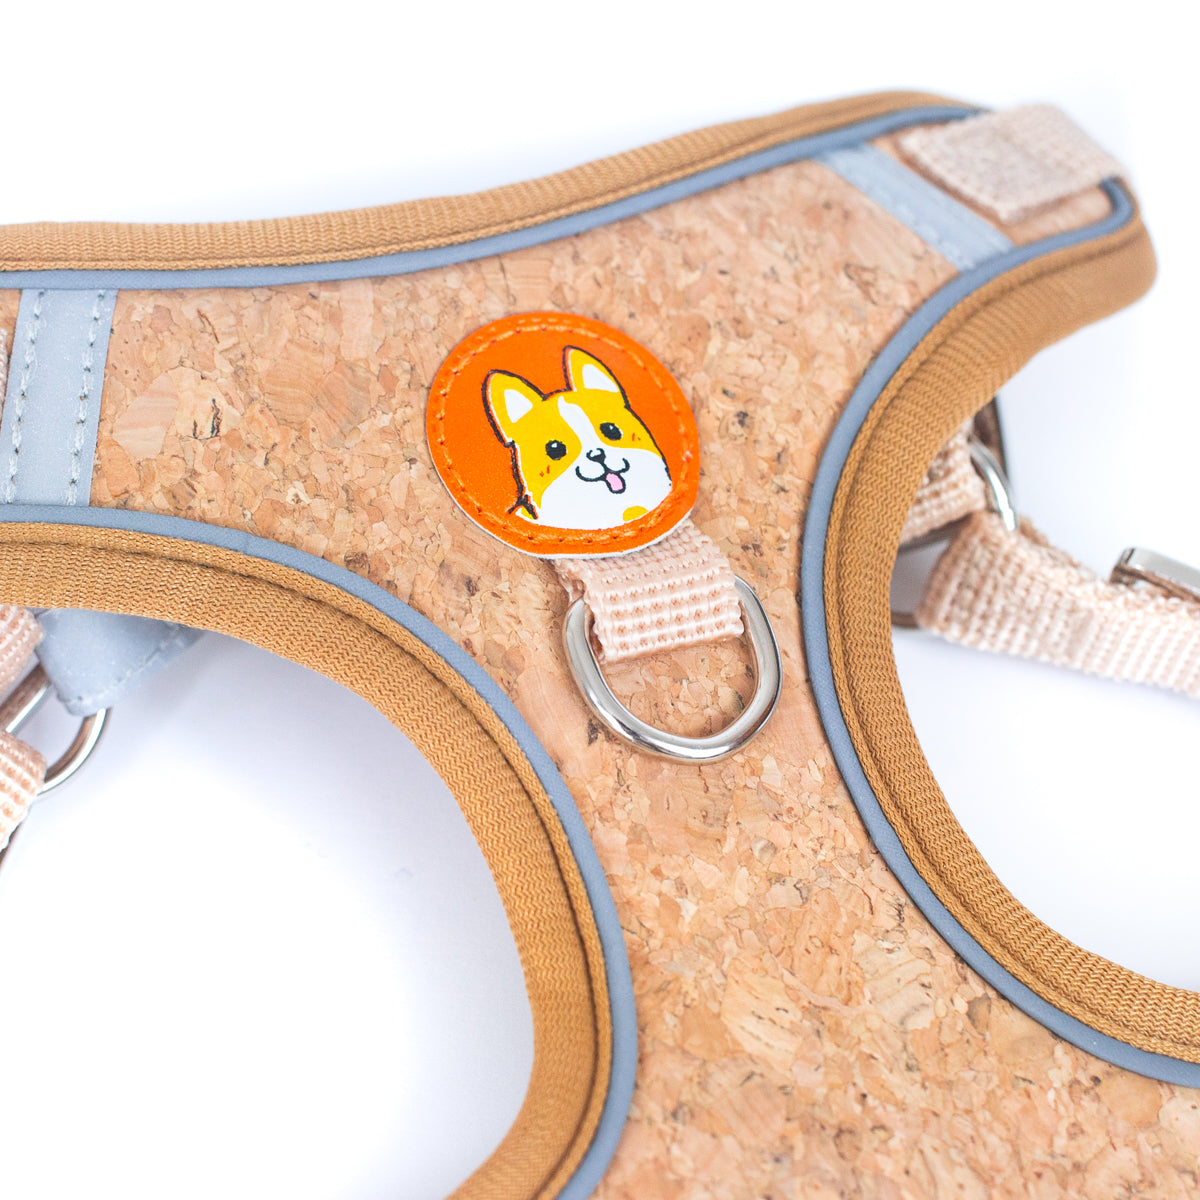 Cork Dog Harness & Leash Set for Small Dogs - Comfortable Vest for Chihuahua, Beagle & Puppies | THE CORK COLLECTION